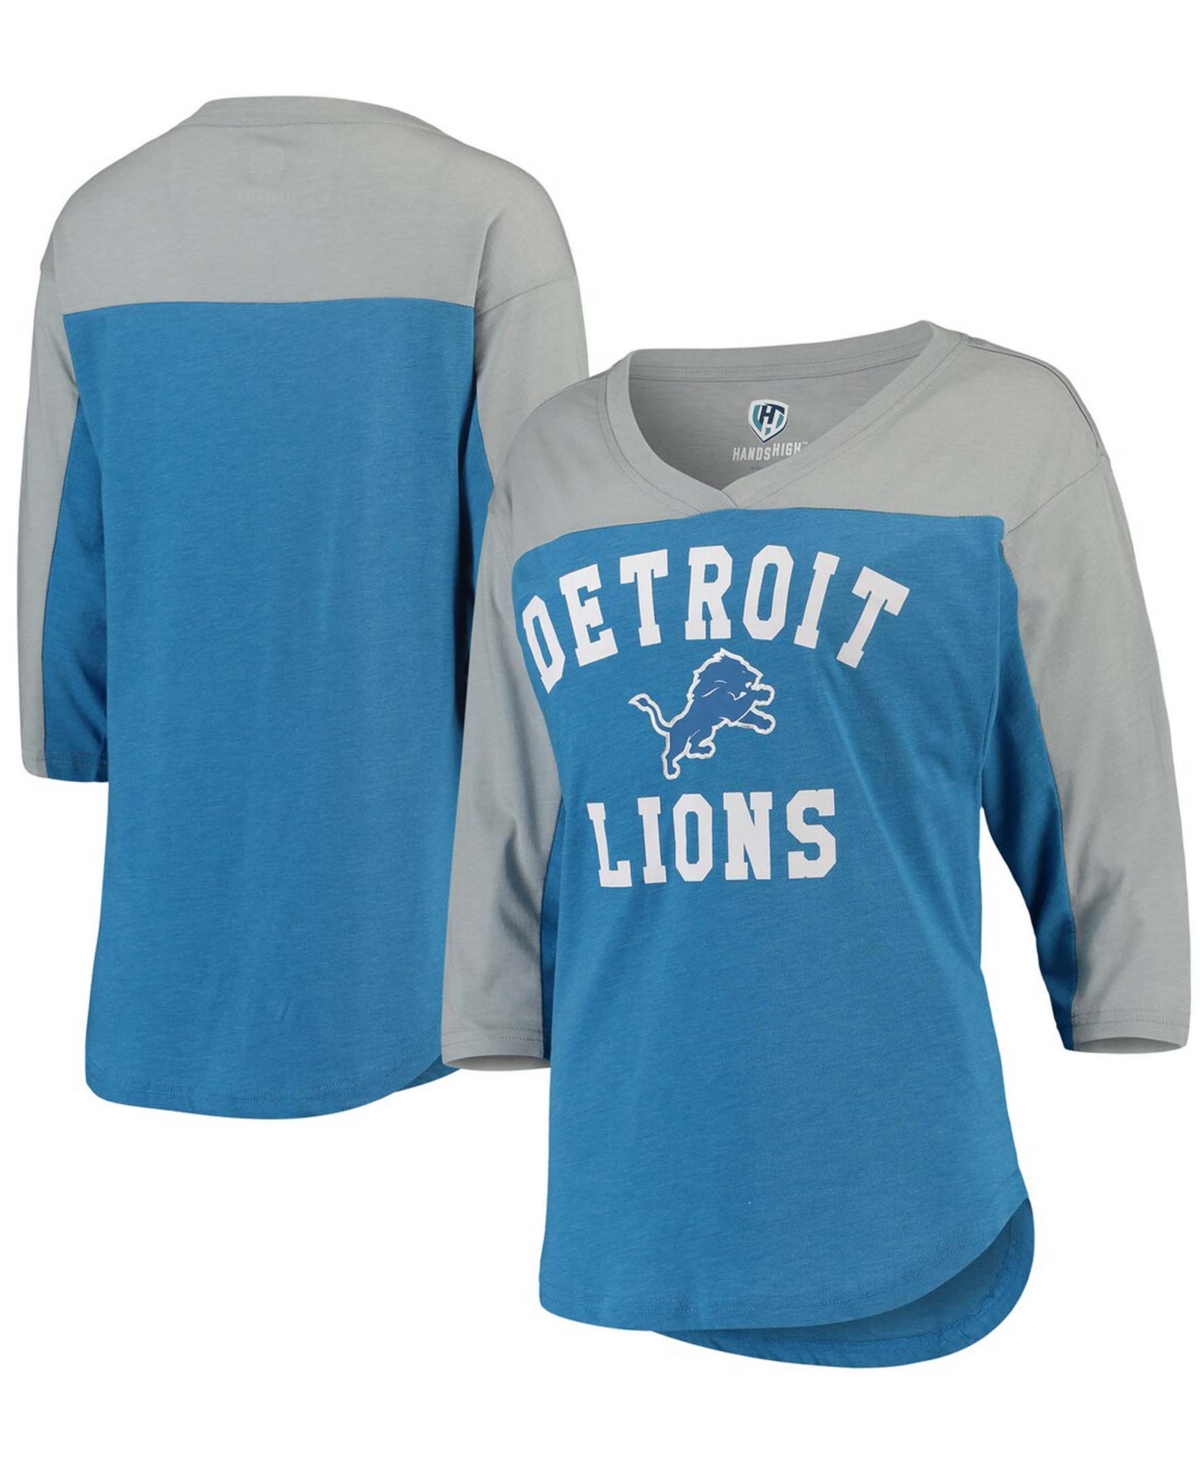 Hands High Women's Blue, Gray Detroit Lions In The Zone 3/4 Sleeve V-Neck T-shirt